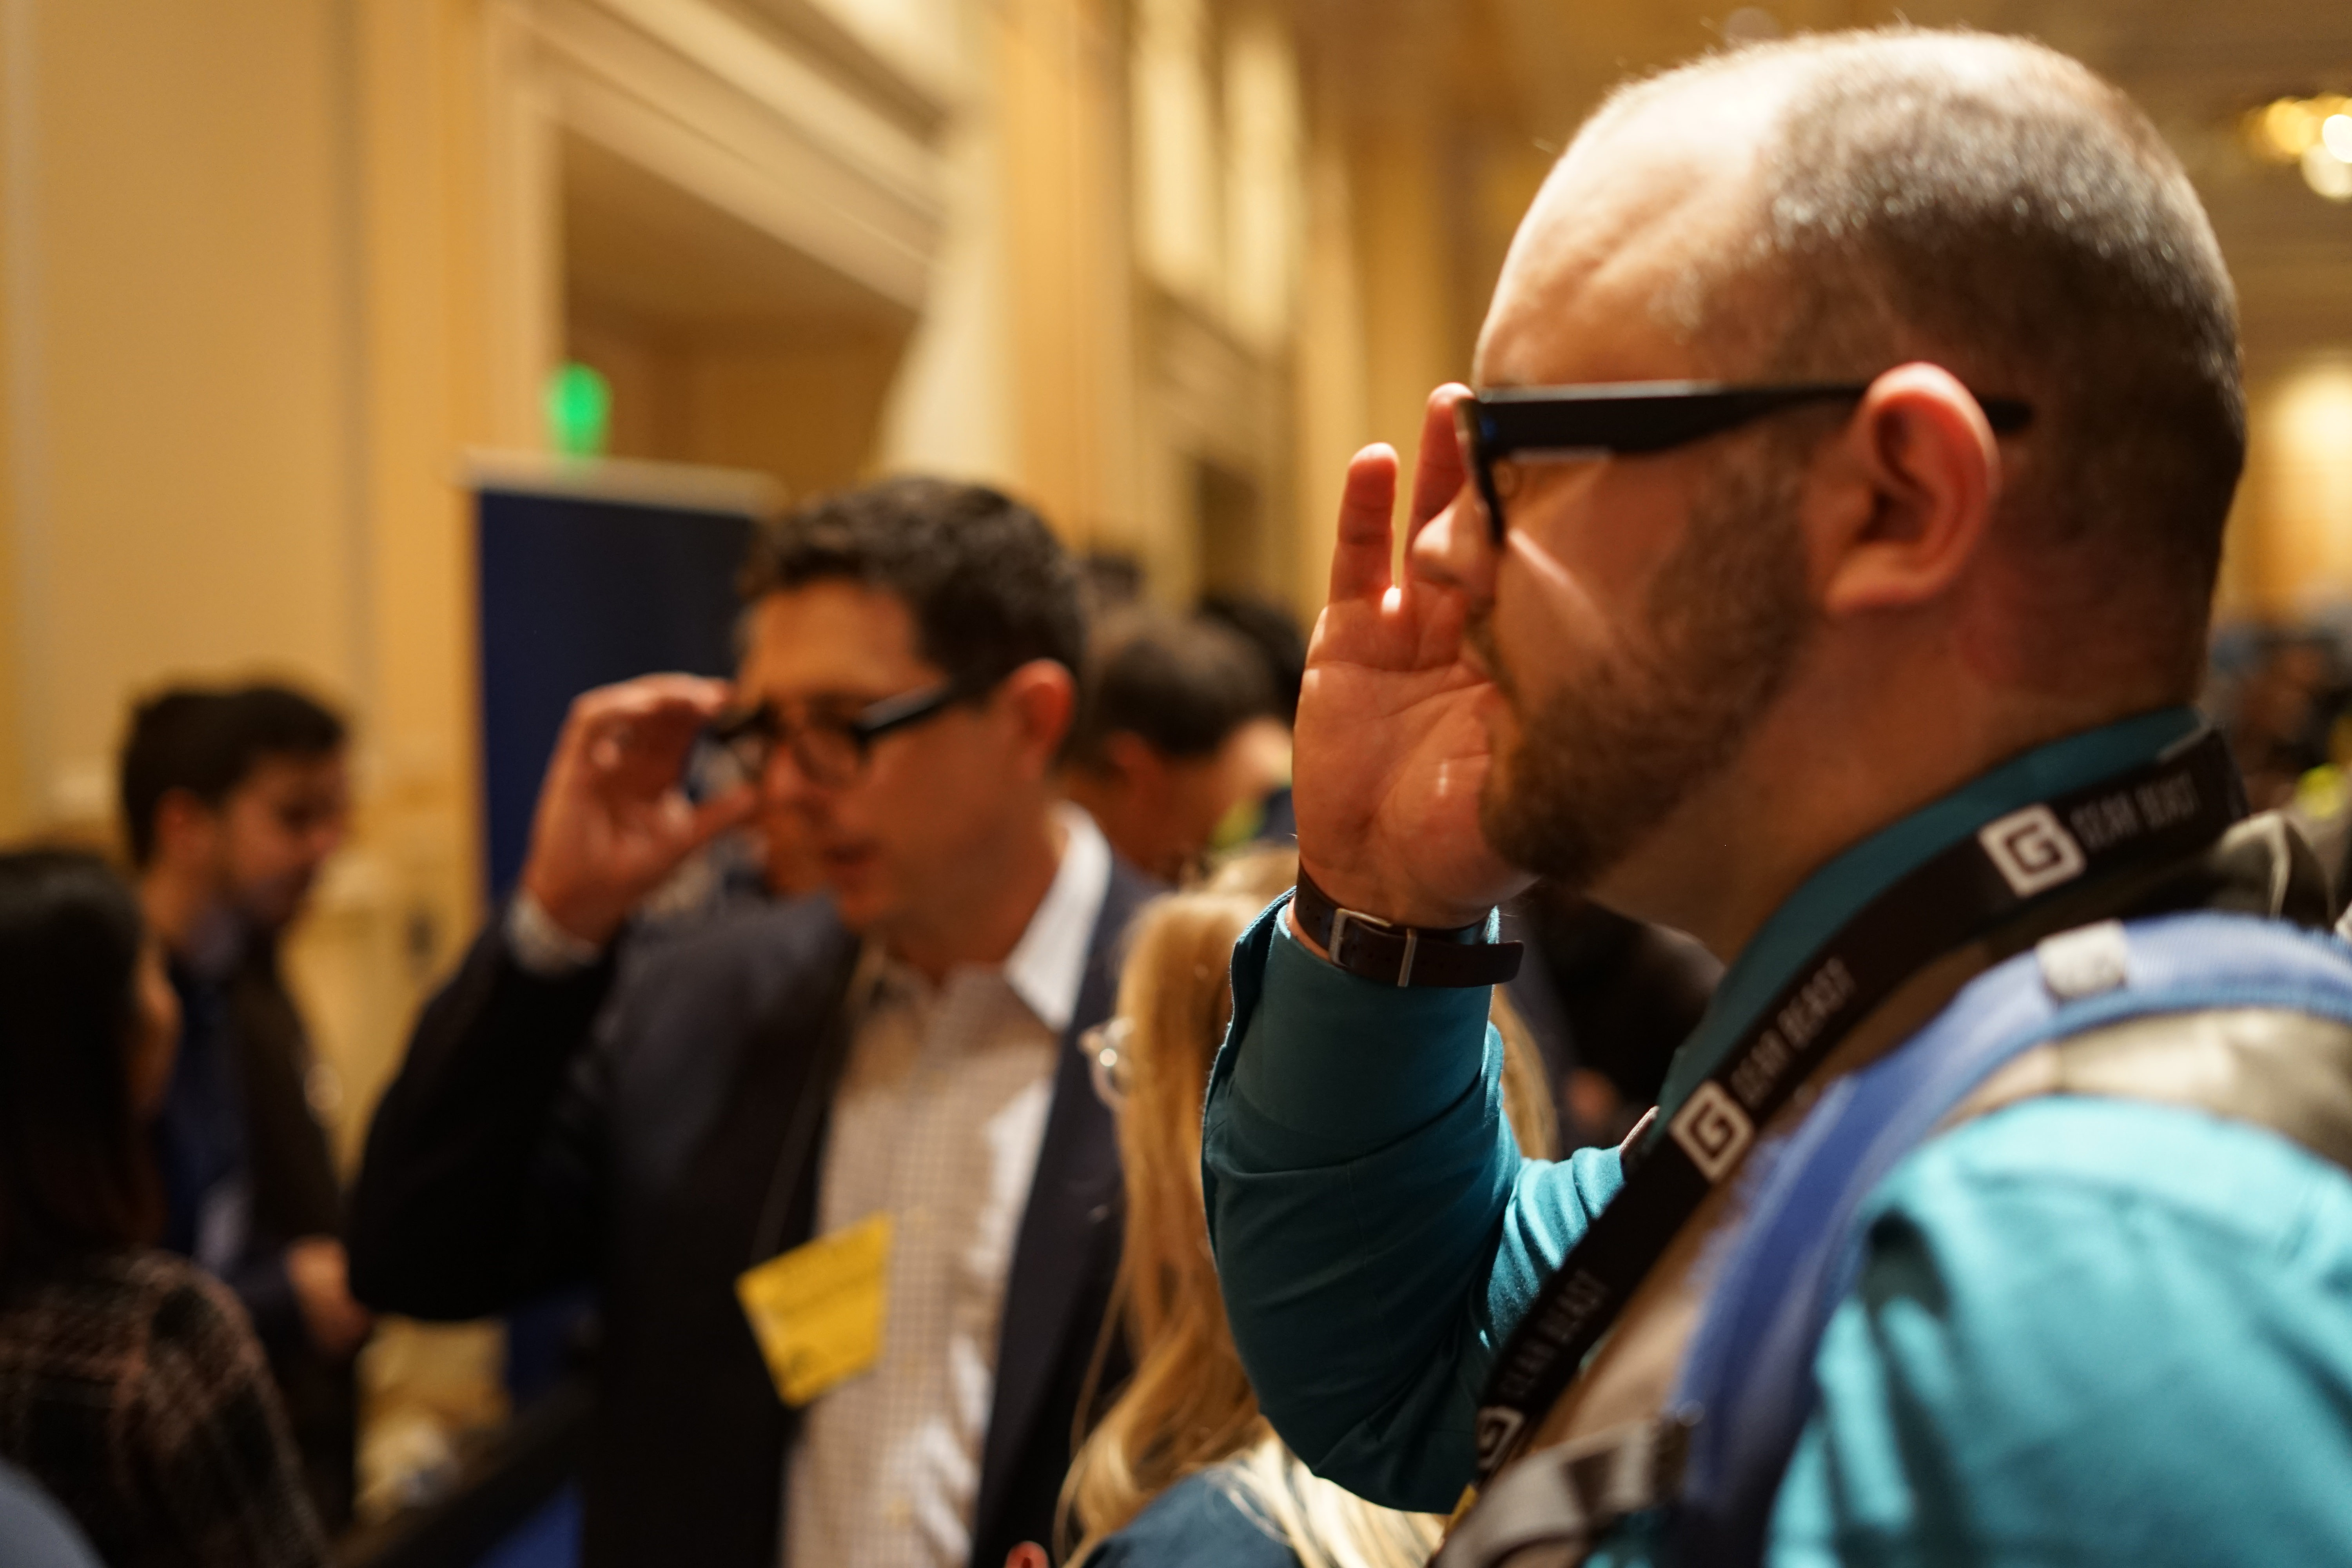 Pepcom showgoers try Focals by North